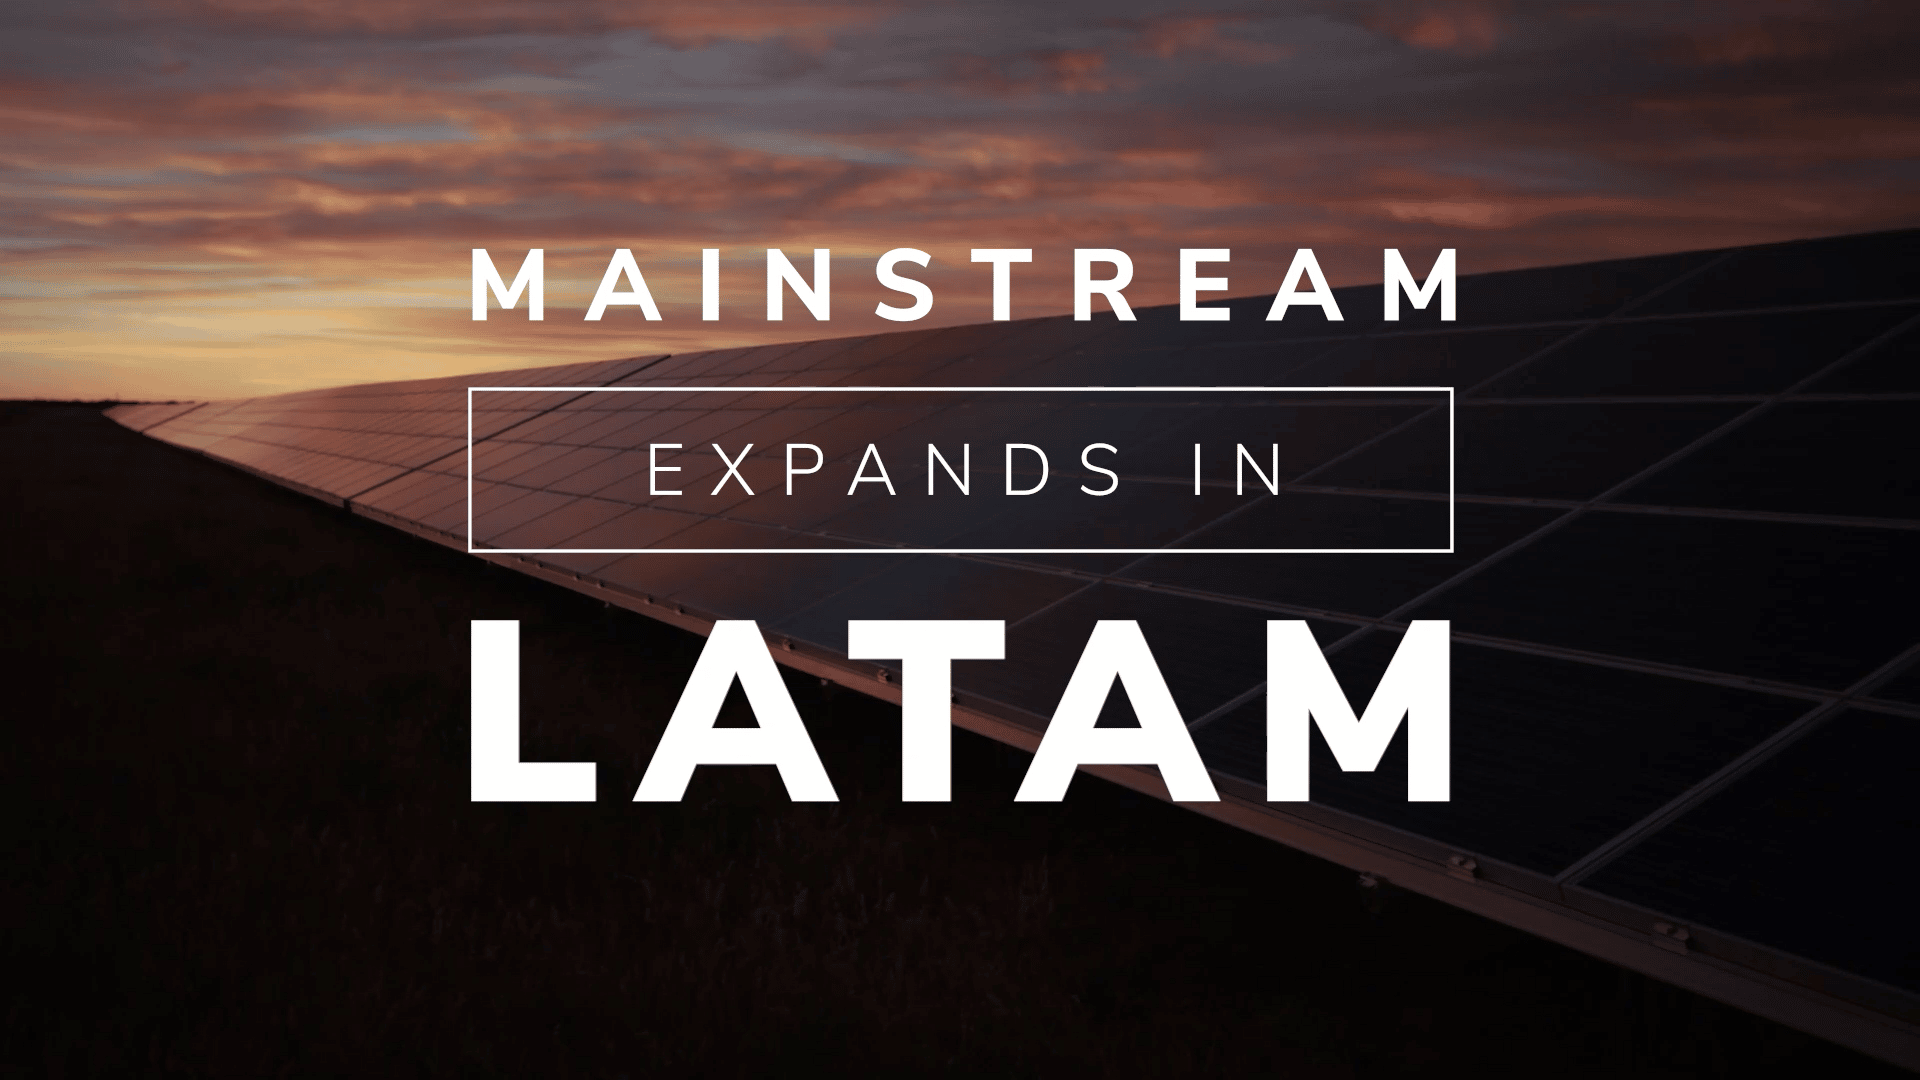 'Mainstream expands in LatAm' video thumbnail